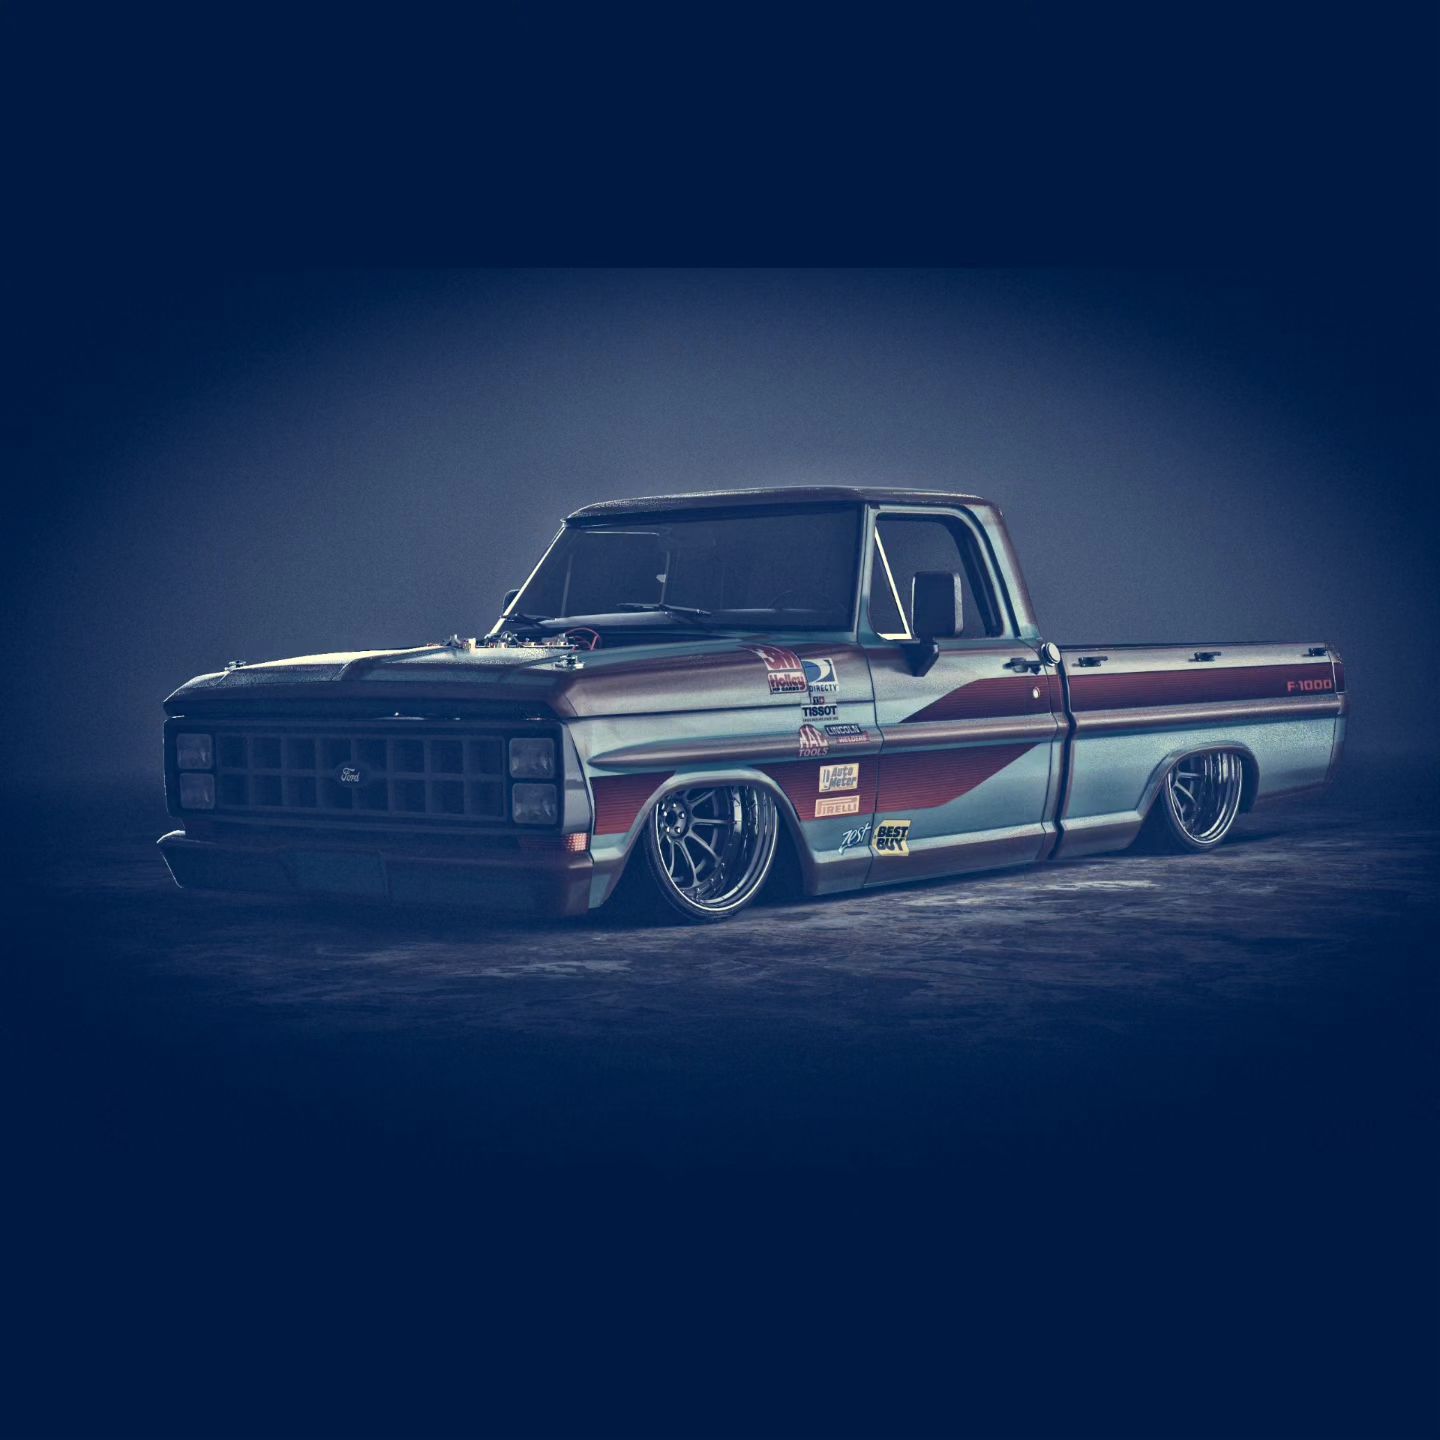 F1000 Project